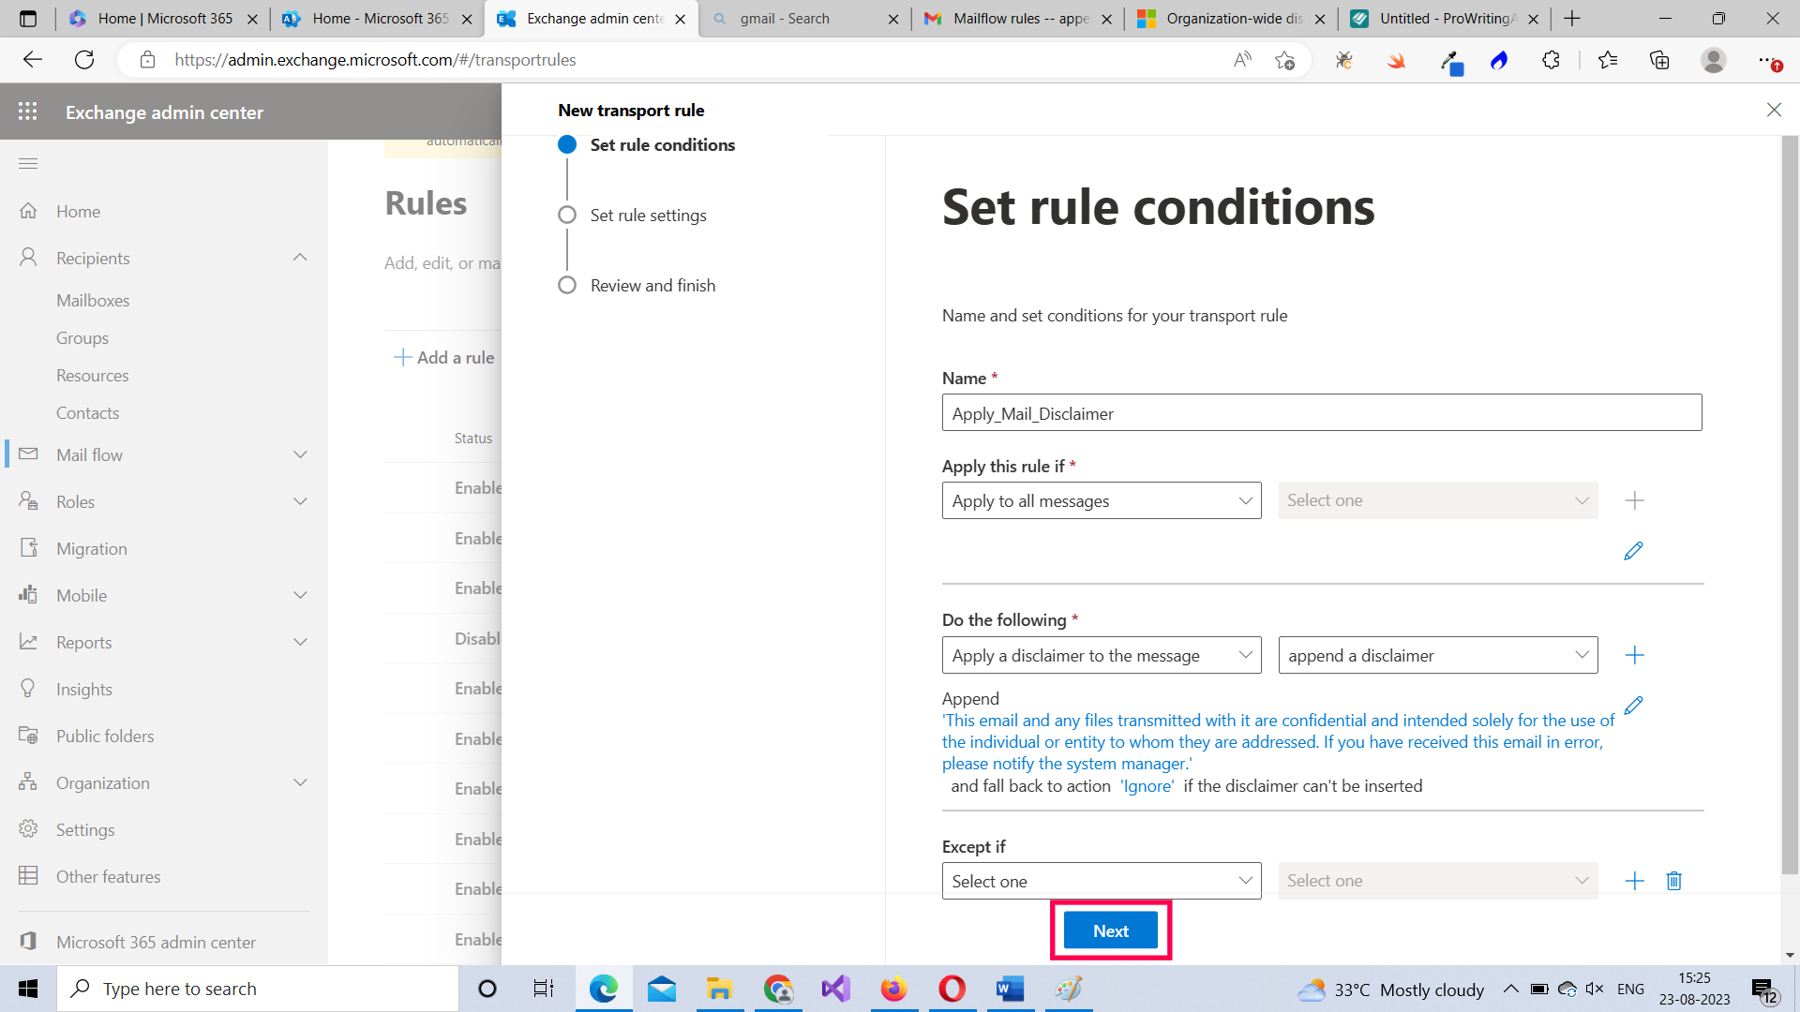 This screenshot shows how you can move to the rule settings pane by clicking the Next button.